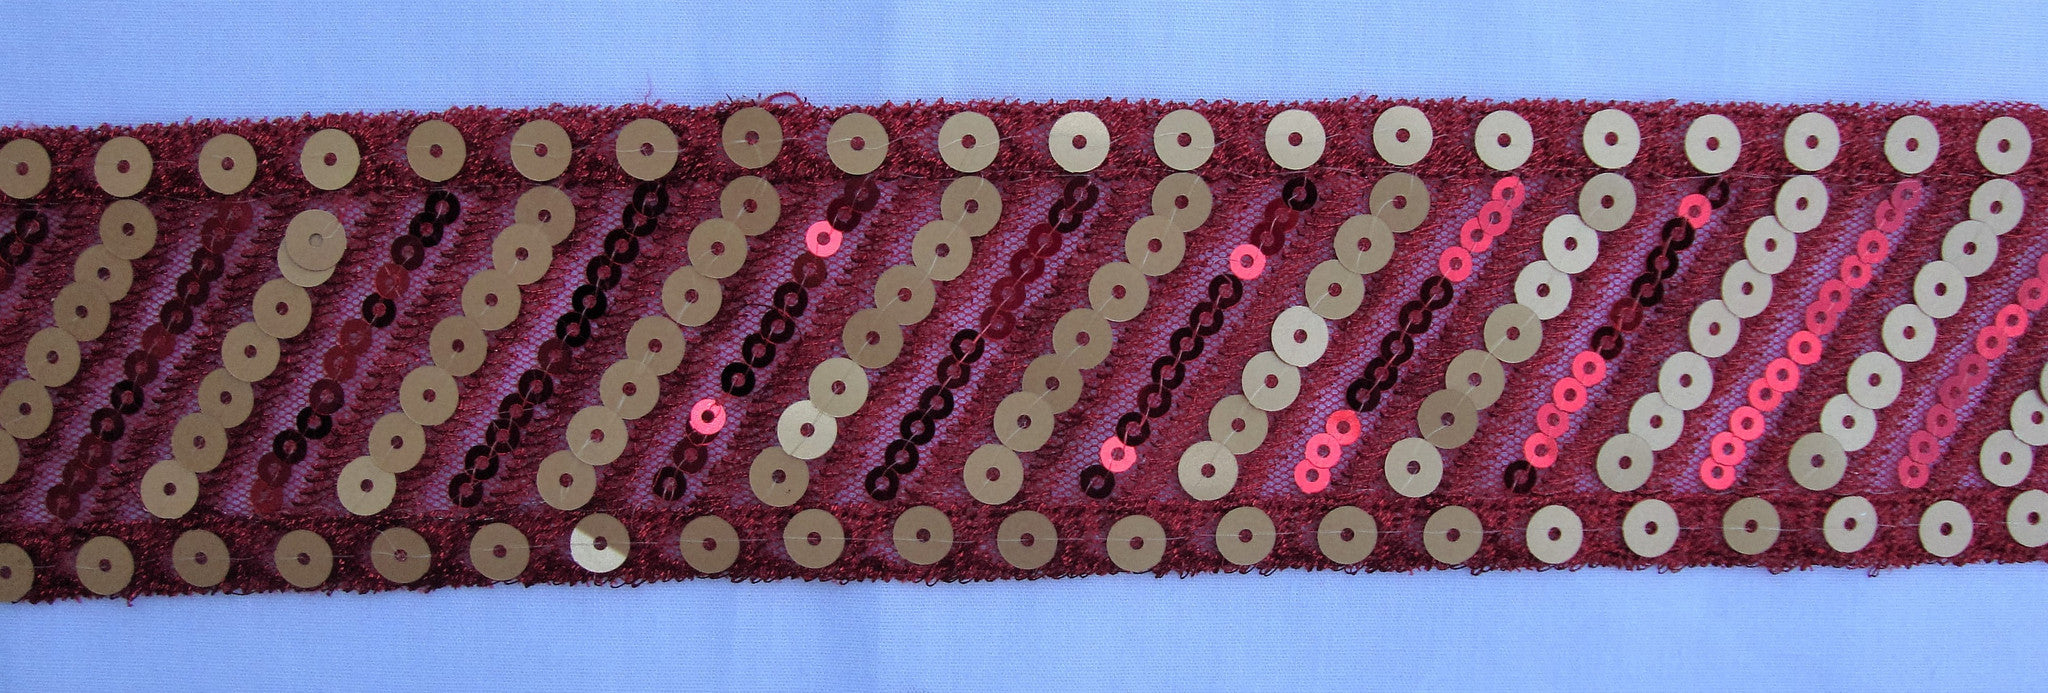 Red Mesh Trimming with Sequins (Sold as a 3 yard piece)